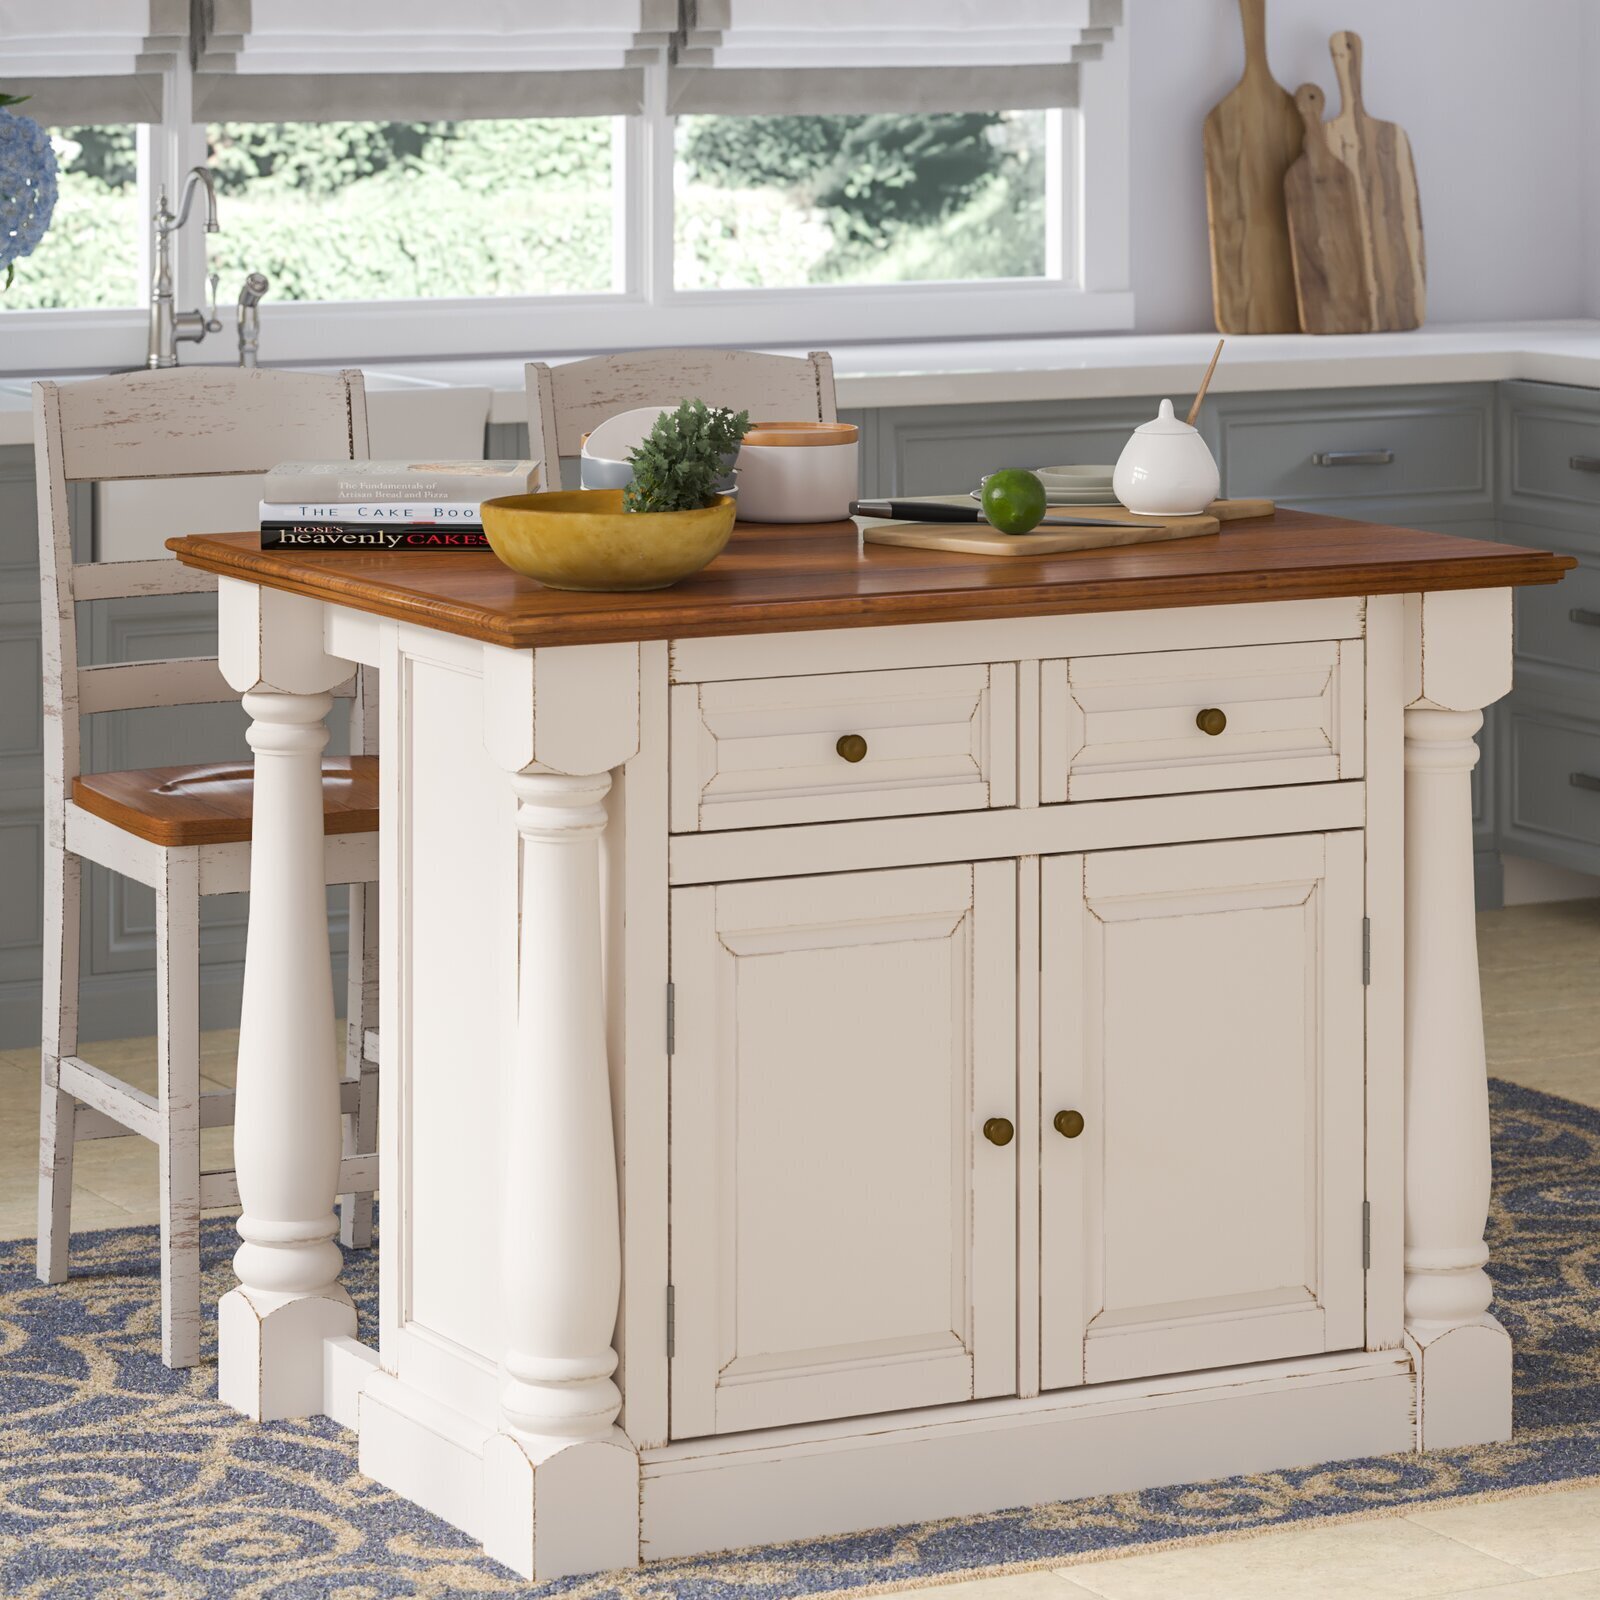 Breakfast Bar with French Country Flair